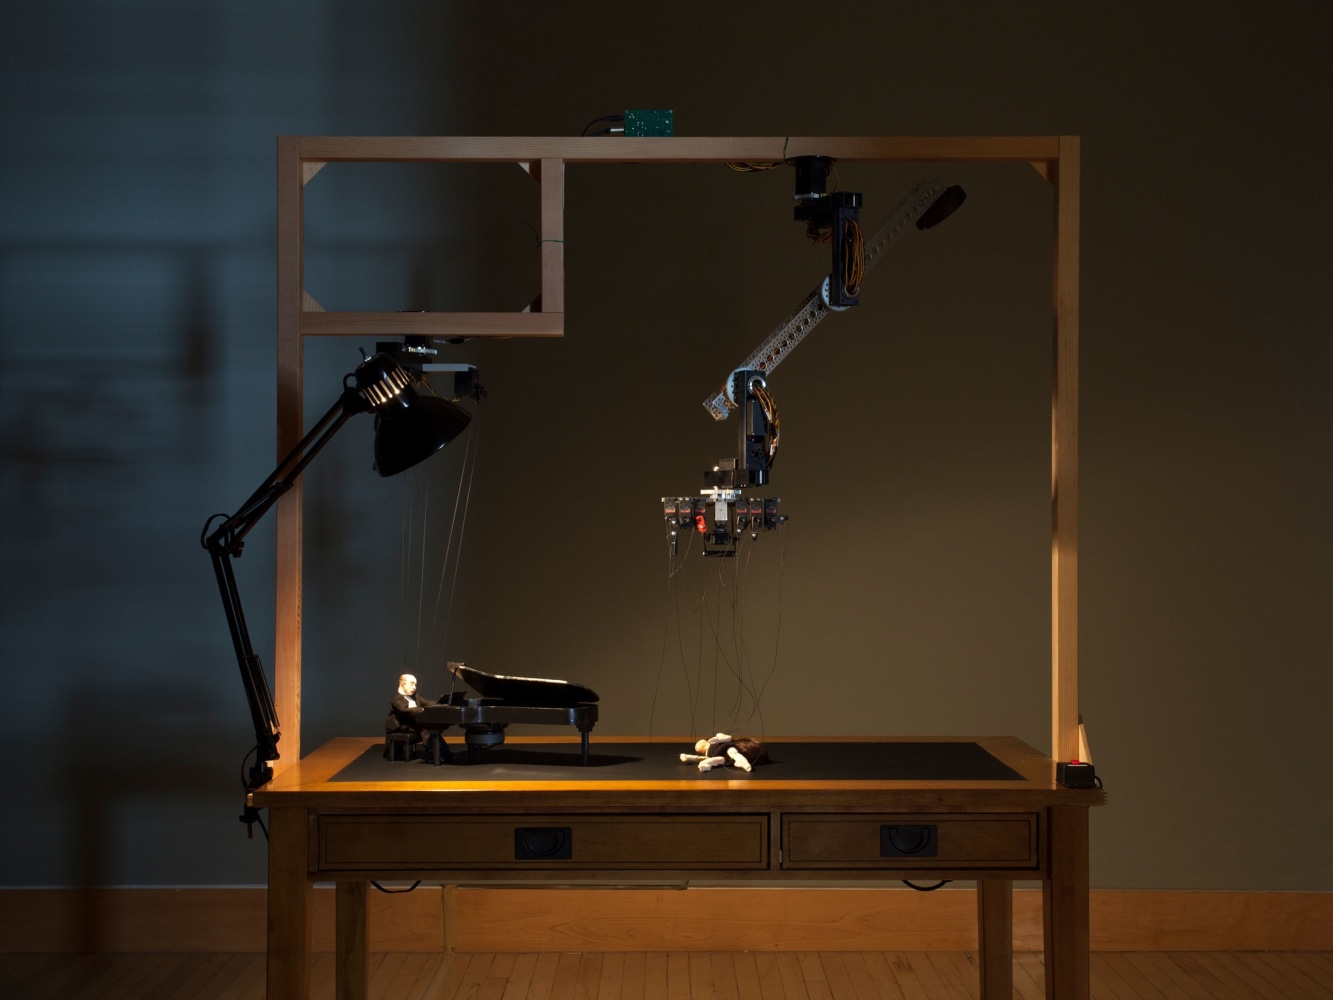 Janet Cardiff and George Bures Miller
Sad Waltz and the Dancer who couldn&amp;#39;t dance, 2015
Mixed media installation including wooden desk, marionettes, robotics, audio, and lighting
Duration: Approximately 4 minutes, looped
55 1/16 x 27 1/2 x 62 15/16 inches
(140 x 70 x 160 cm)
Installation view,&amp;nbsp;THE POETRY MACHINE &amp;amp; Other Works
May 3 &amp;ndash;&amp;nbsp;July 5, 2018
Fraenkel Gallery, San Francisco